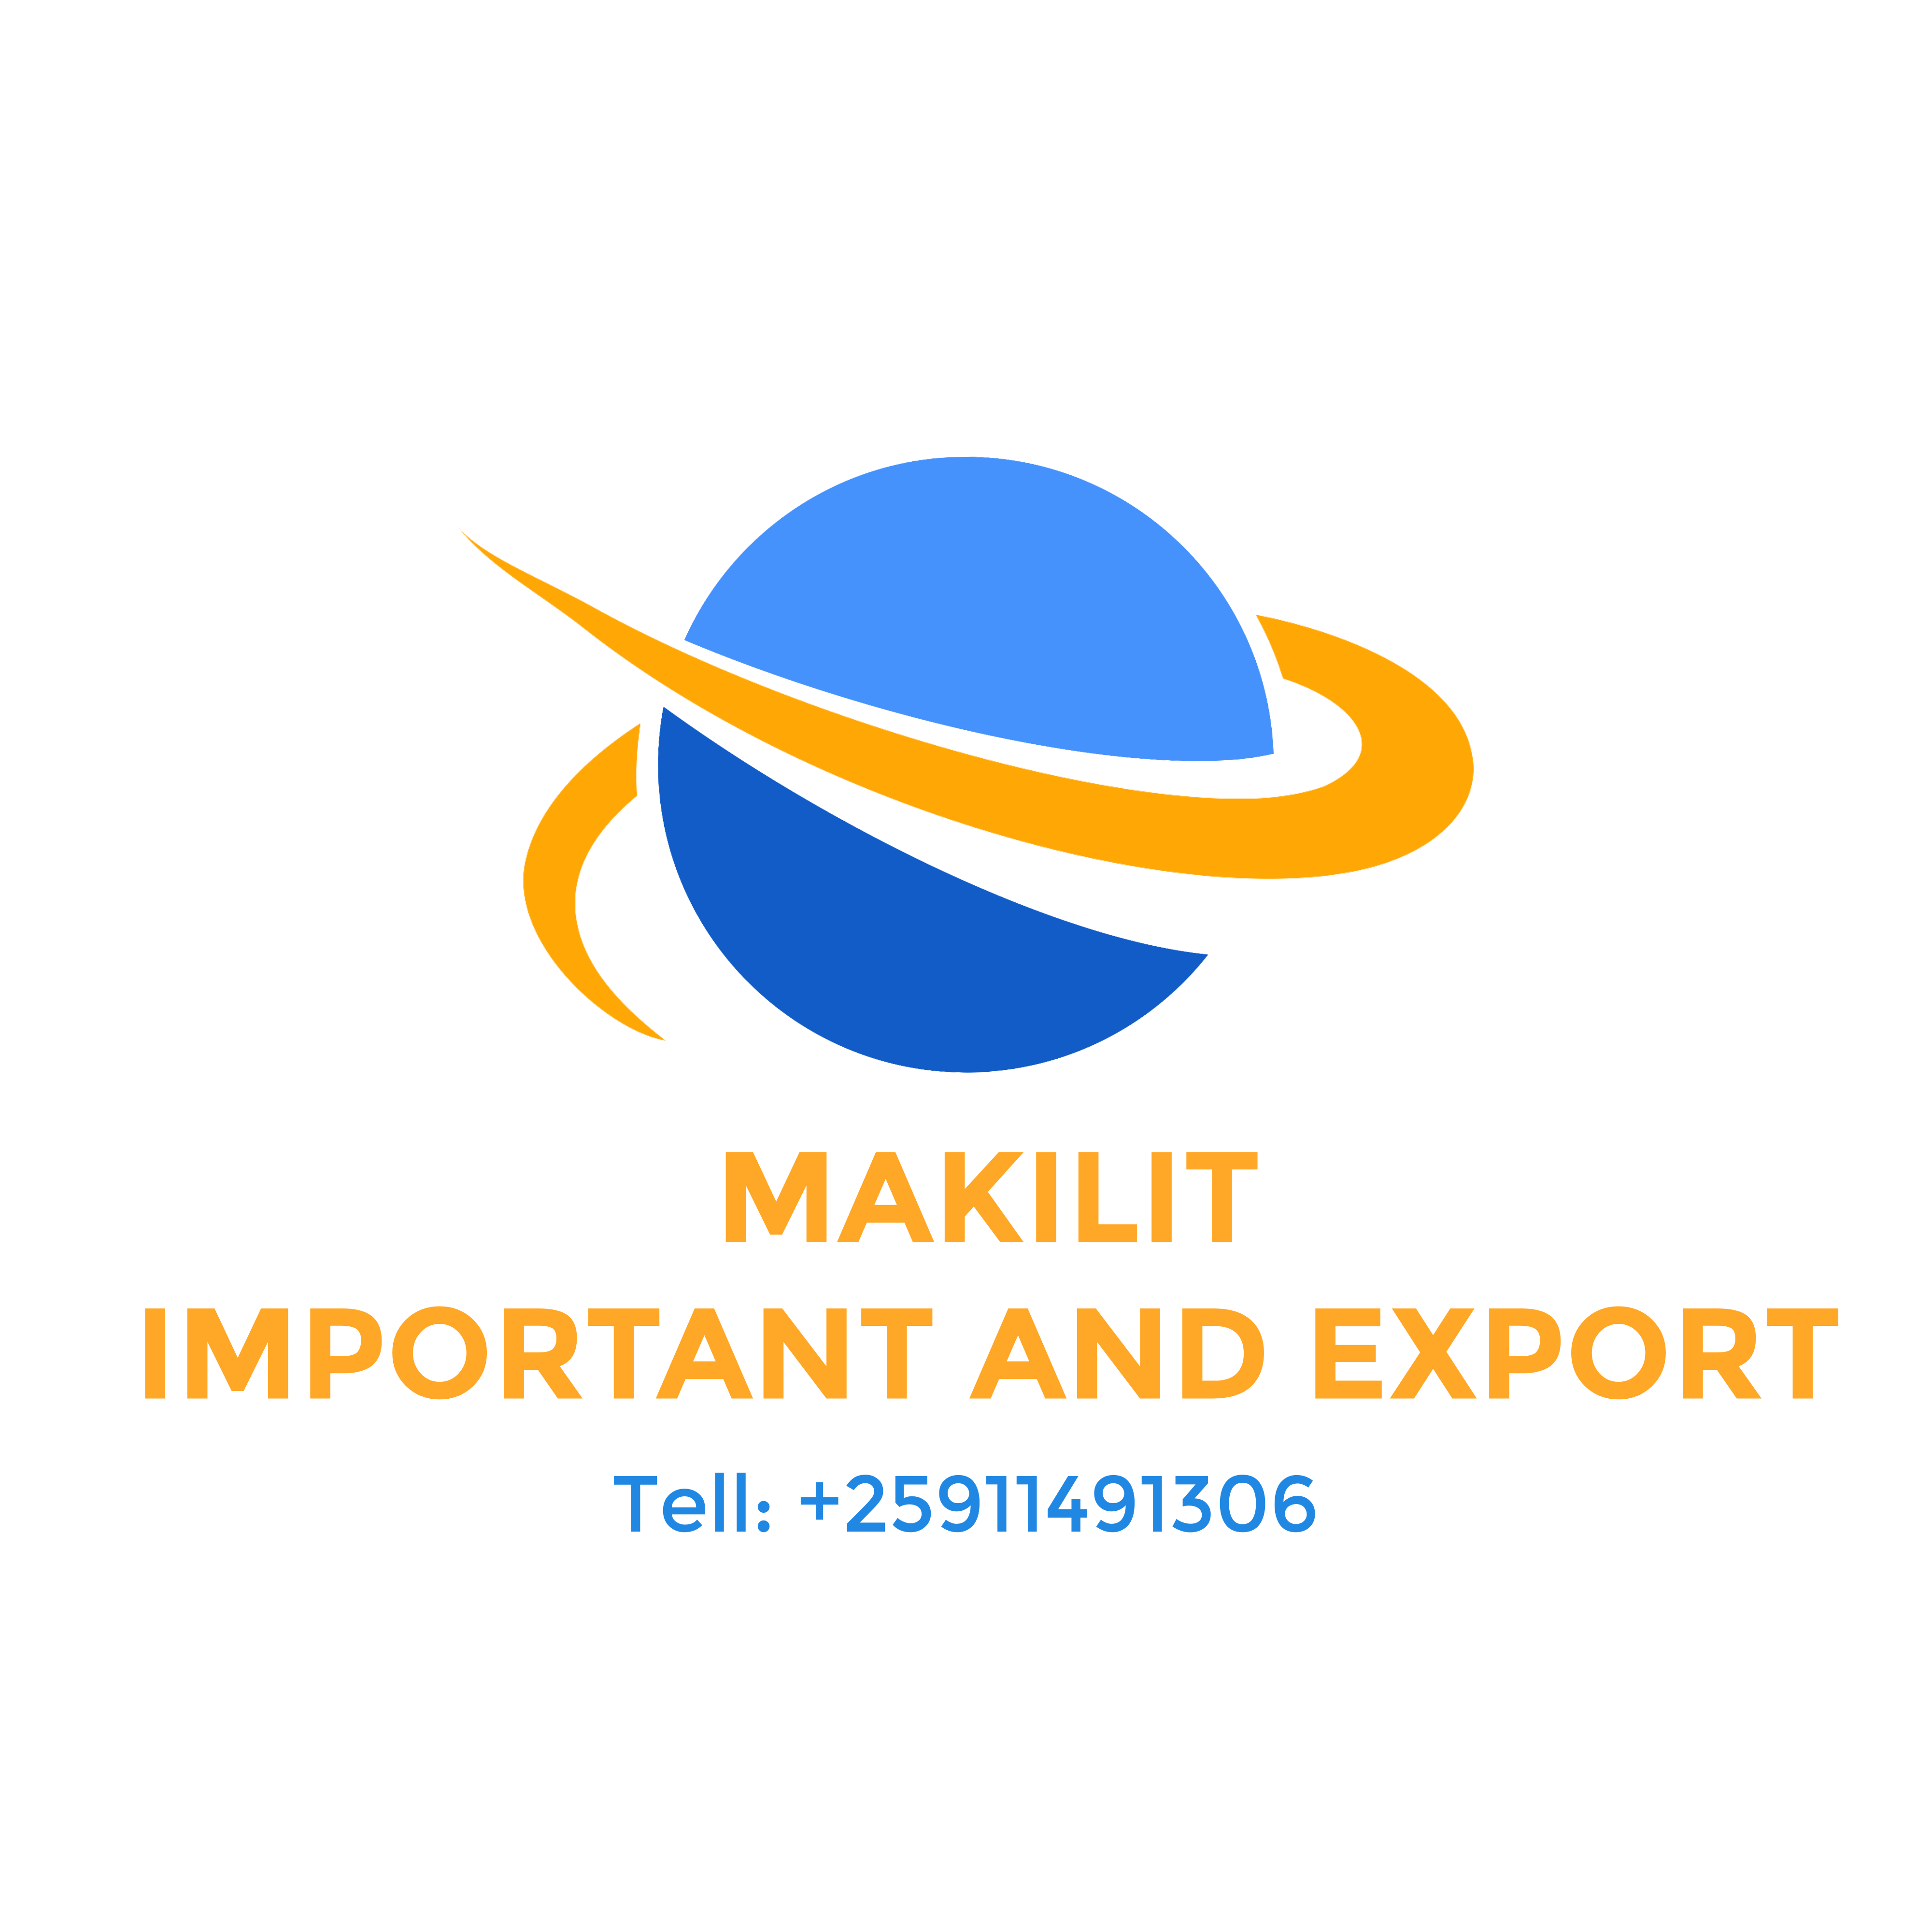 MAKILIT IMPORTANT AND EXPORT